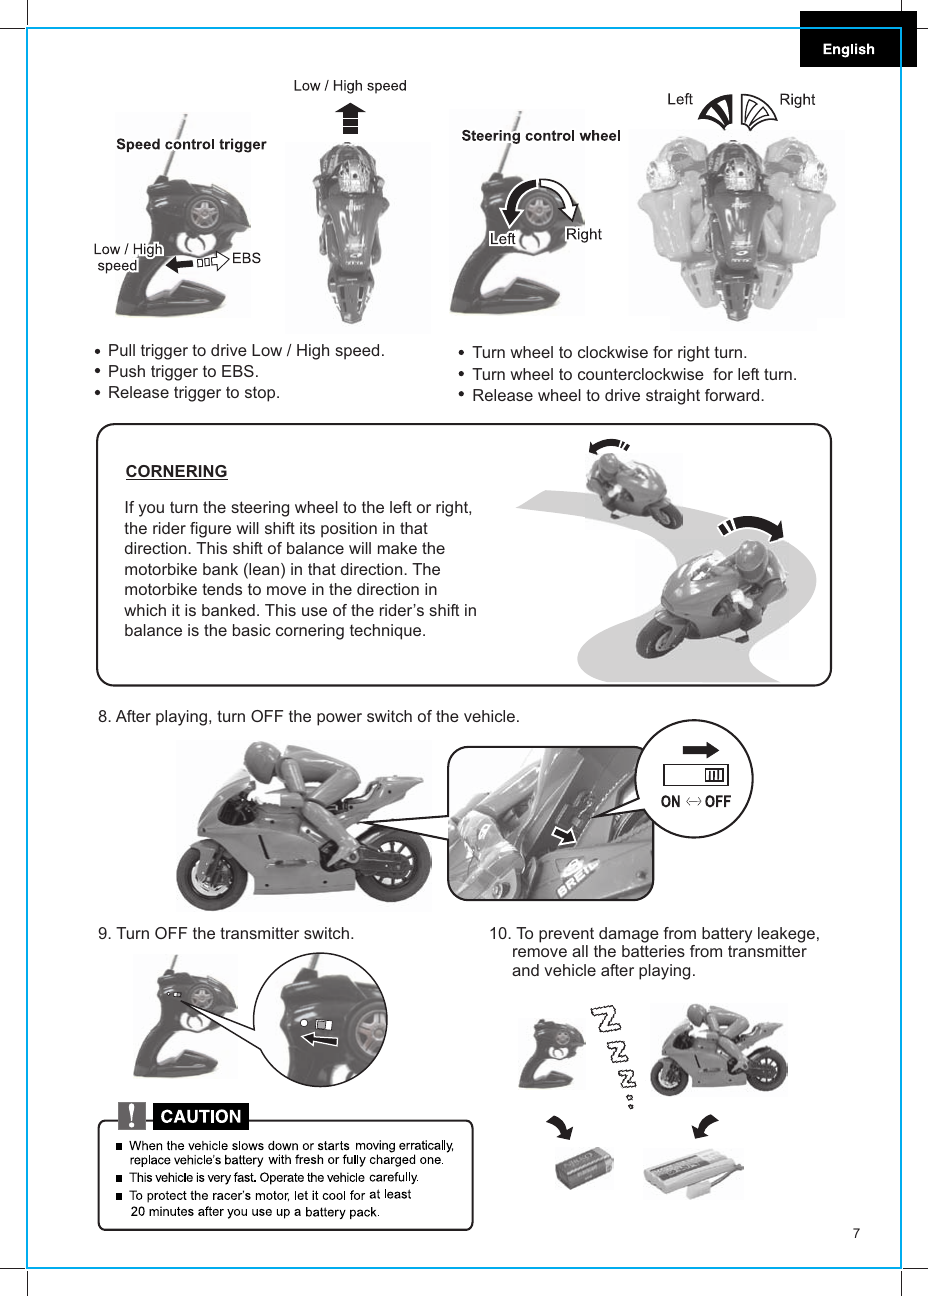 10. To prevent damage from battery leakege,      remove all the batteries from transmitter      and vehicle after playing.8. After playing, turn OFF the power switch of the vehicle.9. Turn OFF the transmitter switch.Turn wheel to clockwise for right turn.Turn wheel to counterclockwise  for left turn.Release wheel to drive straight forward.Pull trigger to drive Low / High speed.Push trigger to EBS.Release trigger to stop.If you turn the steering wheel to the left or right,the rider figure will shift its position in thatdirection. This shift of balance will make the motorbike bank (lean) in that direction. The motorbike tends to move in the direction in which it is banked. This use of the rider’s shift in balance is the basic cornering technique.CORNERING7